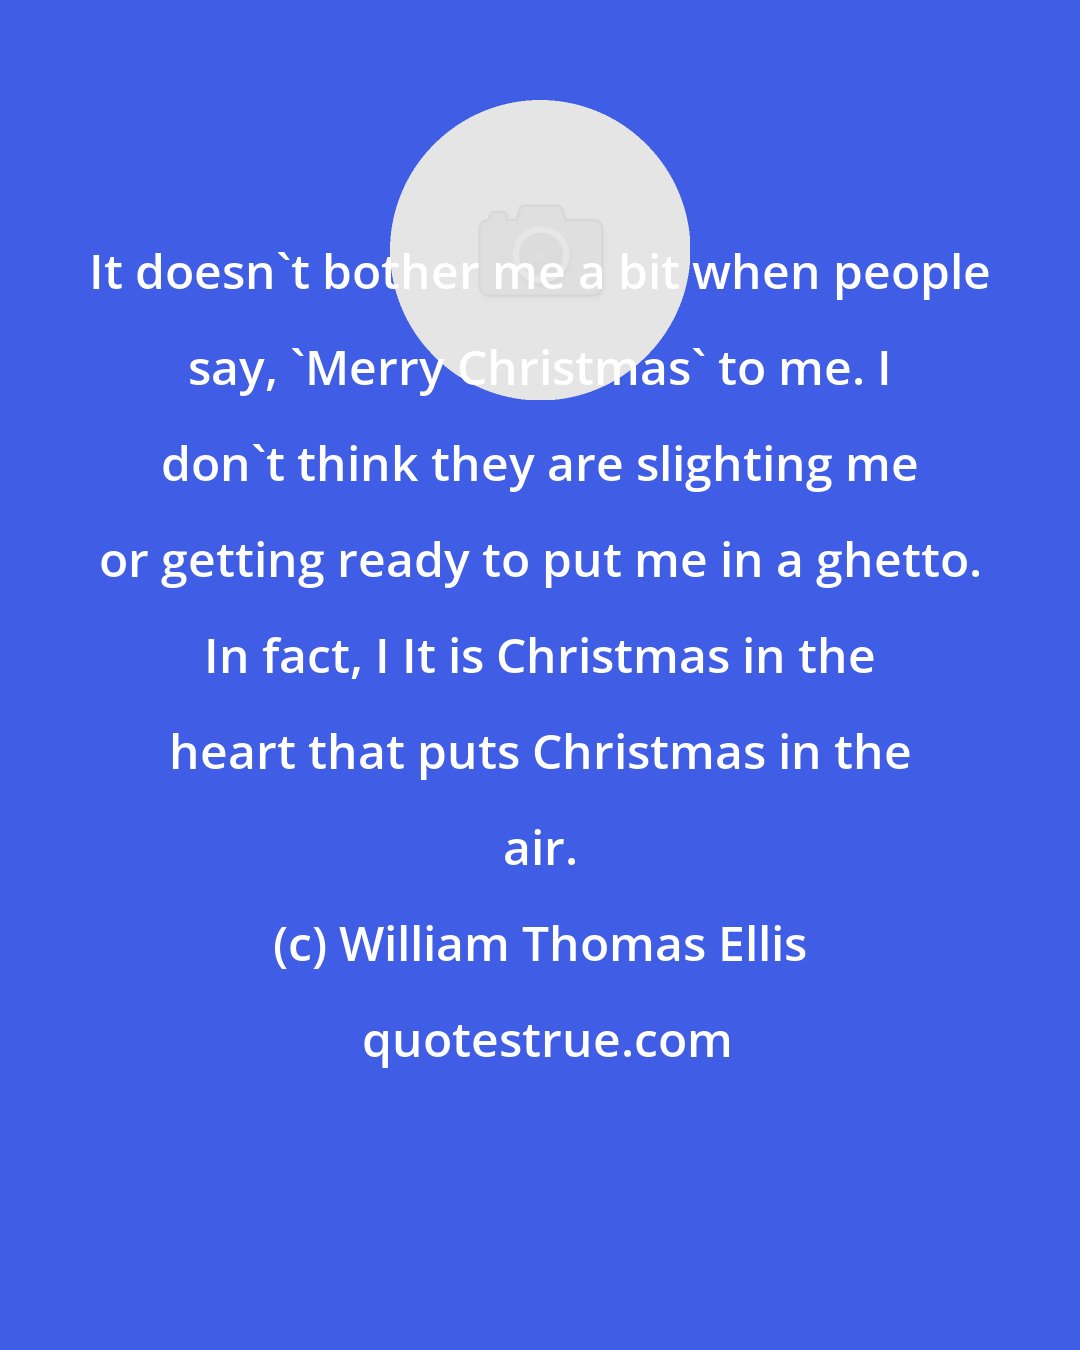 William Thomas Ellis: It doesn't bother me a bit when people say, 'Merry Christmas' to me. I don't think they are slighting me or getting ready to put me in a ghetto. In fact, I It is Christmas in the heart that puts Christmas in the air.